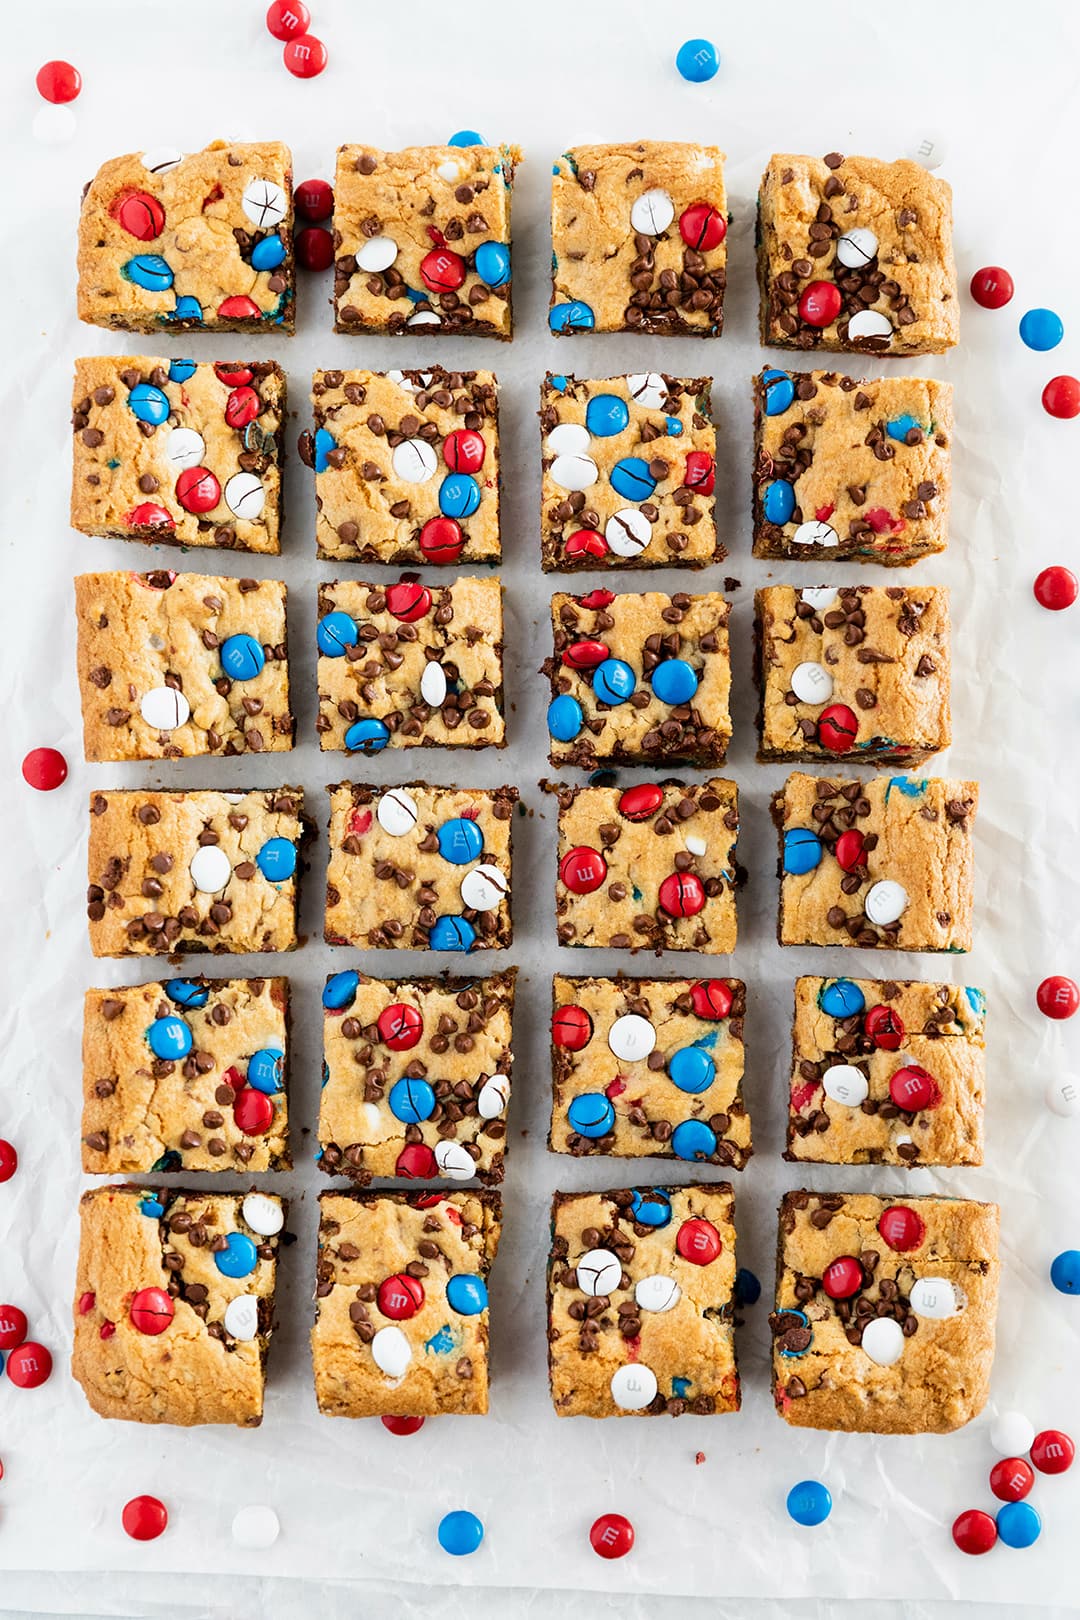 Red, White and Blue M&M’S Cookie Bars